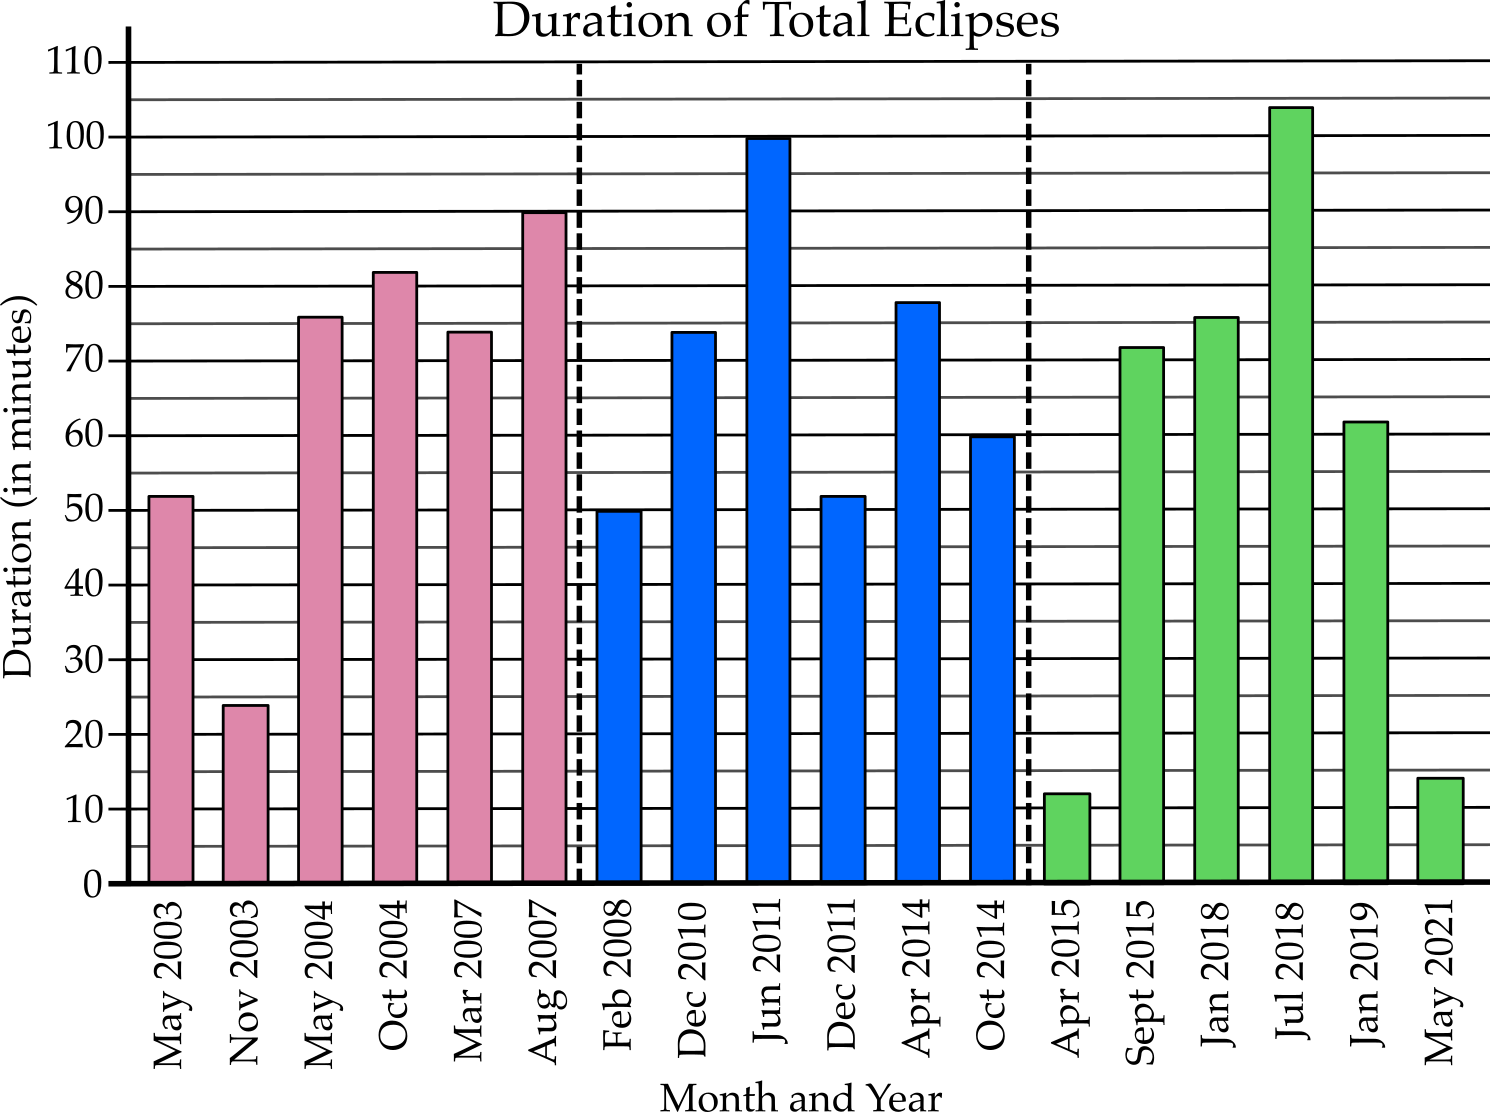 A bar graph shows the Duration of Total Eclipses (in minutes). There is a bar for each month and year with an eclipse. The first section of the graph shows the six eclipses from May 2003 to August 2007. The second section shows the six eclipses Feb 2008 to October 2014, and the final section shows the six eclipses from April 2015 to May 2021.